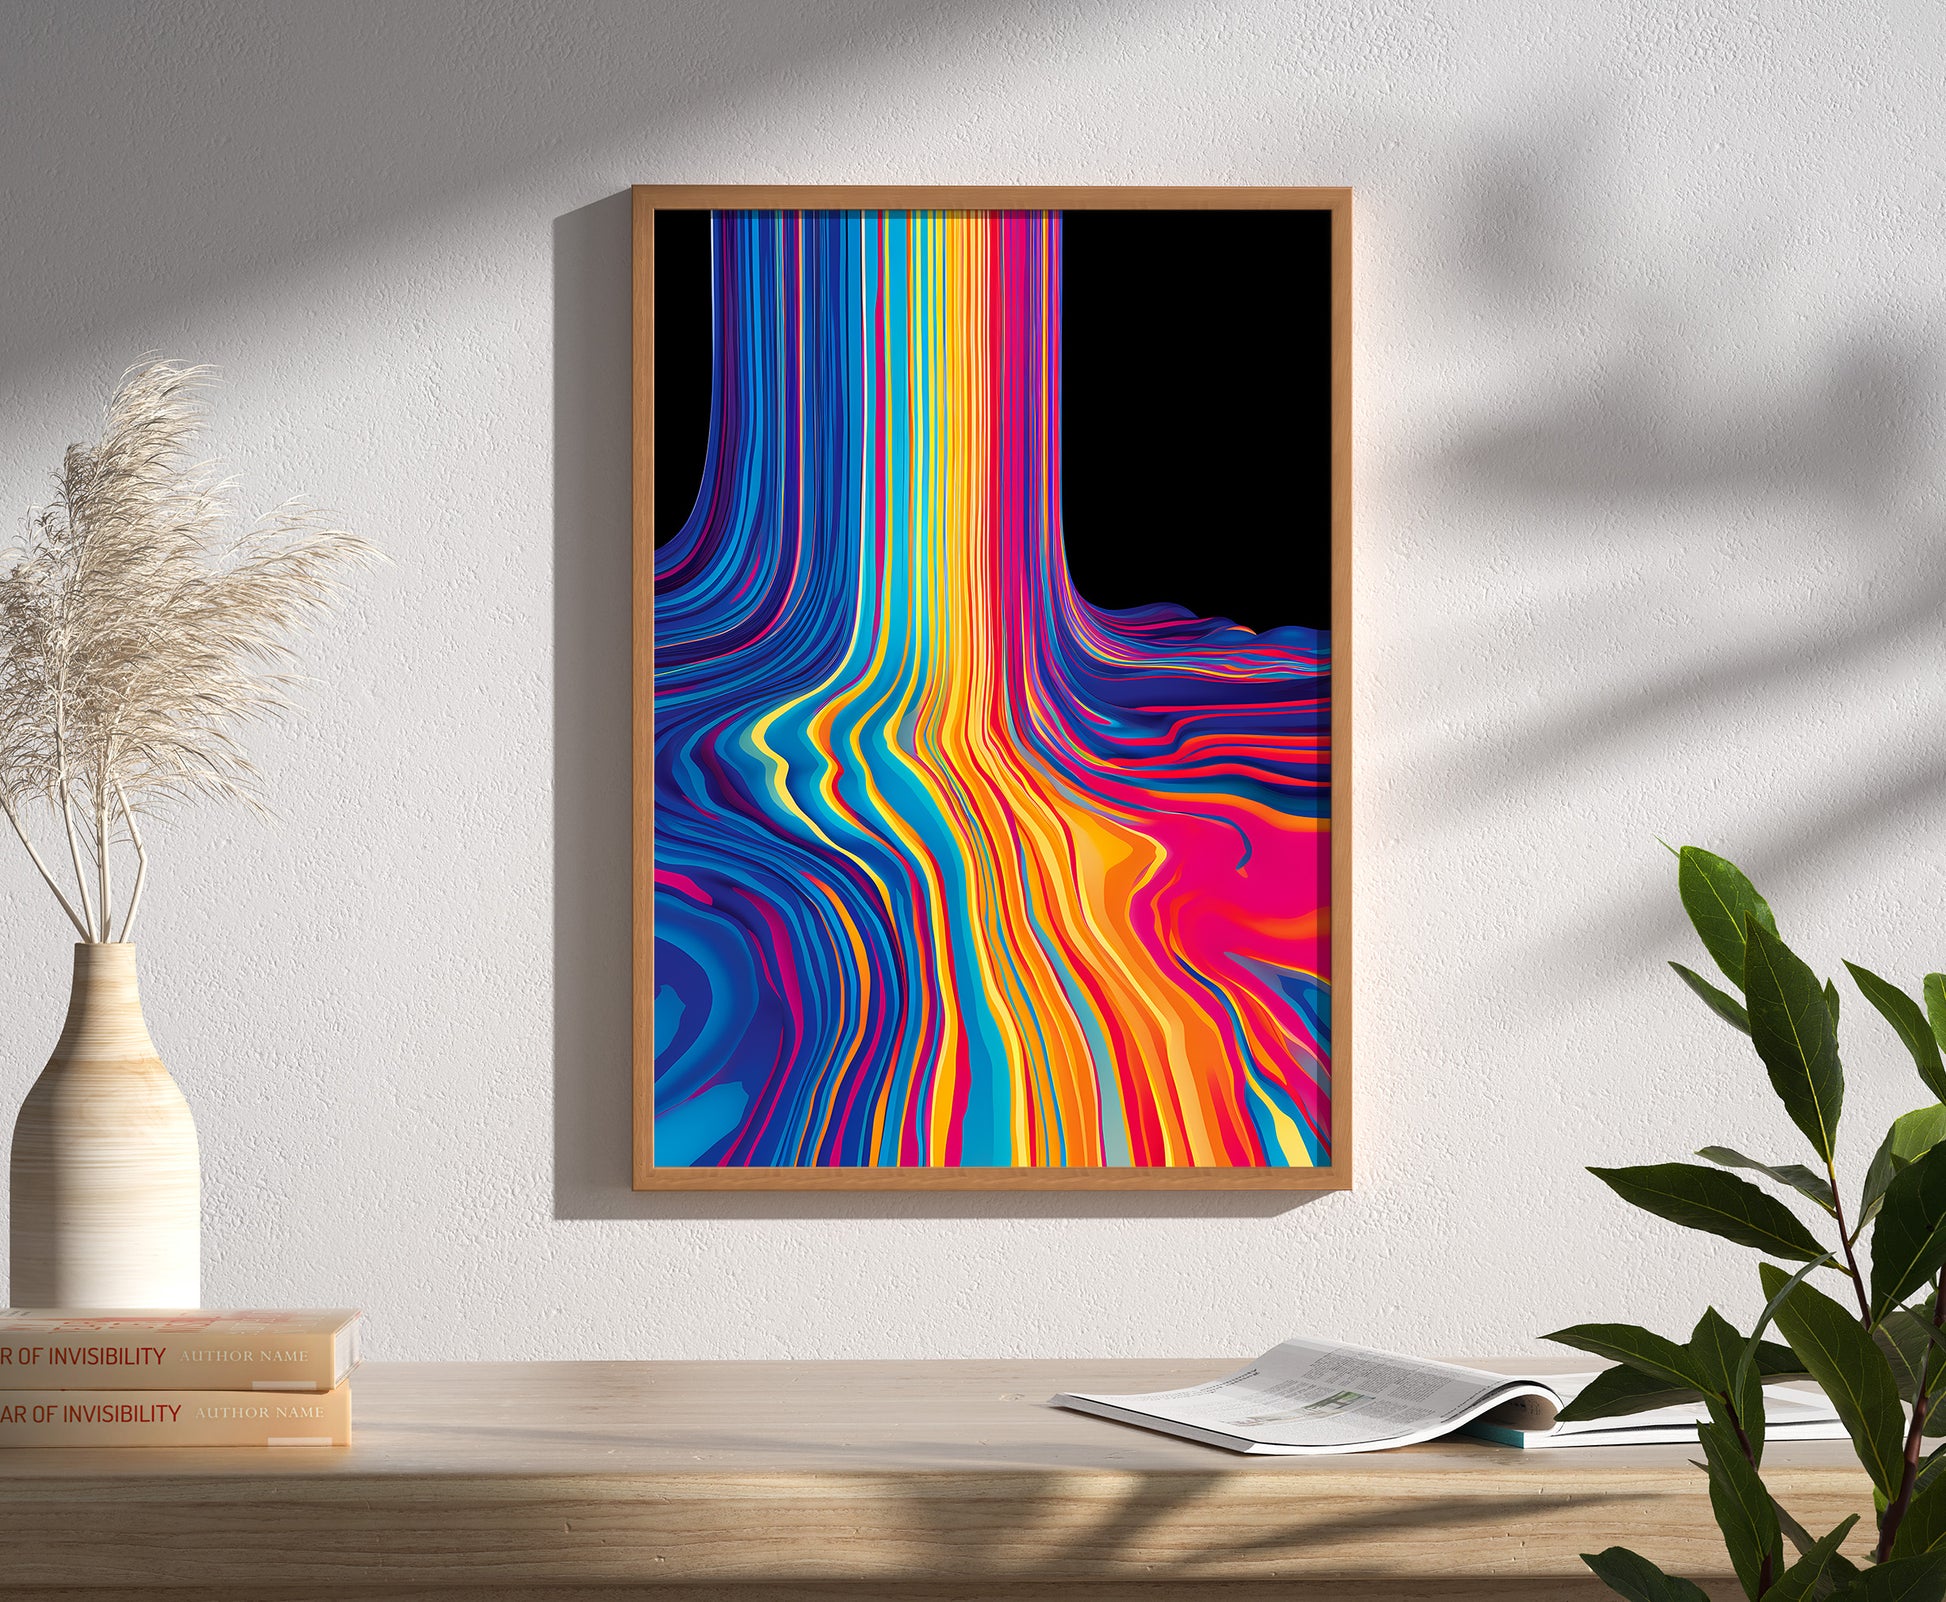 Abstract colorful wavy lines art in a frame on a wall with plant and books.